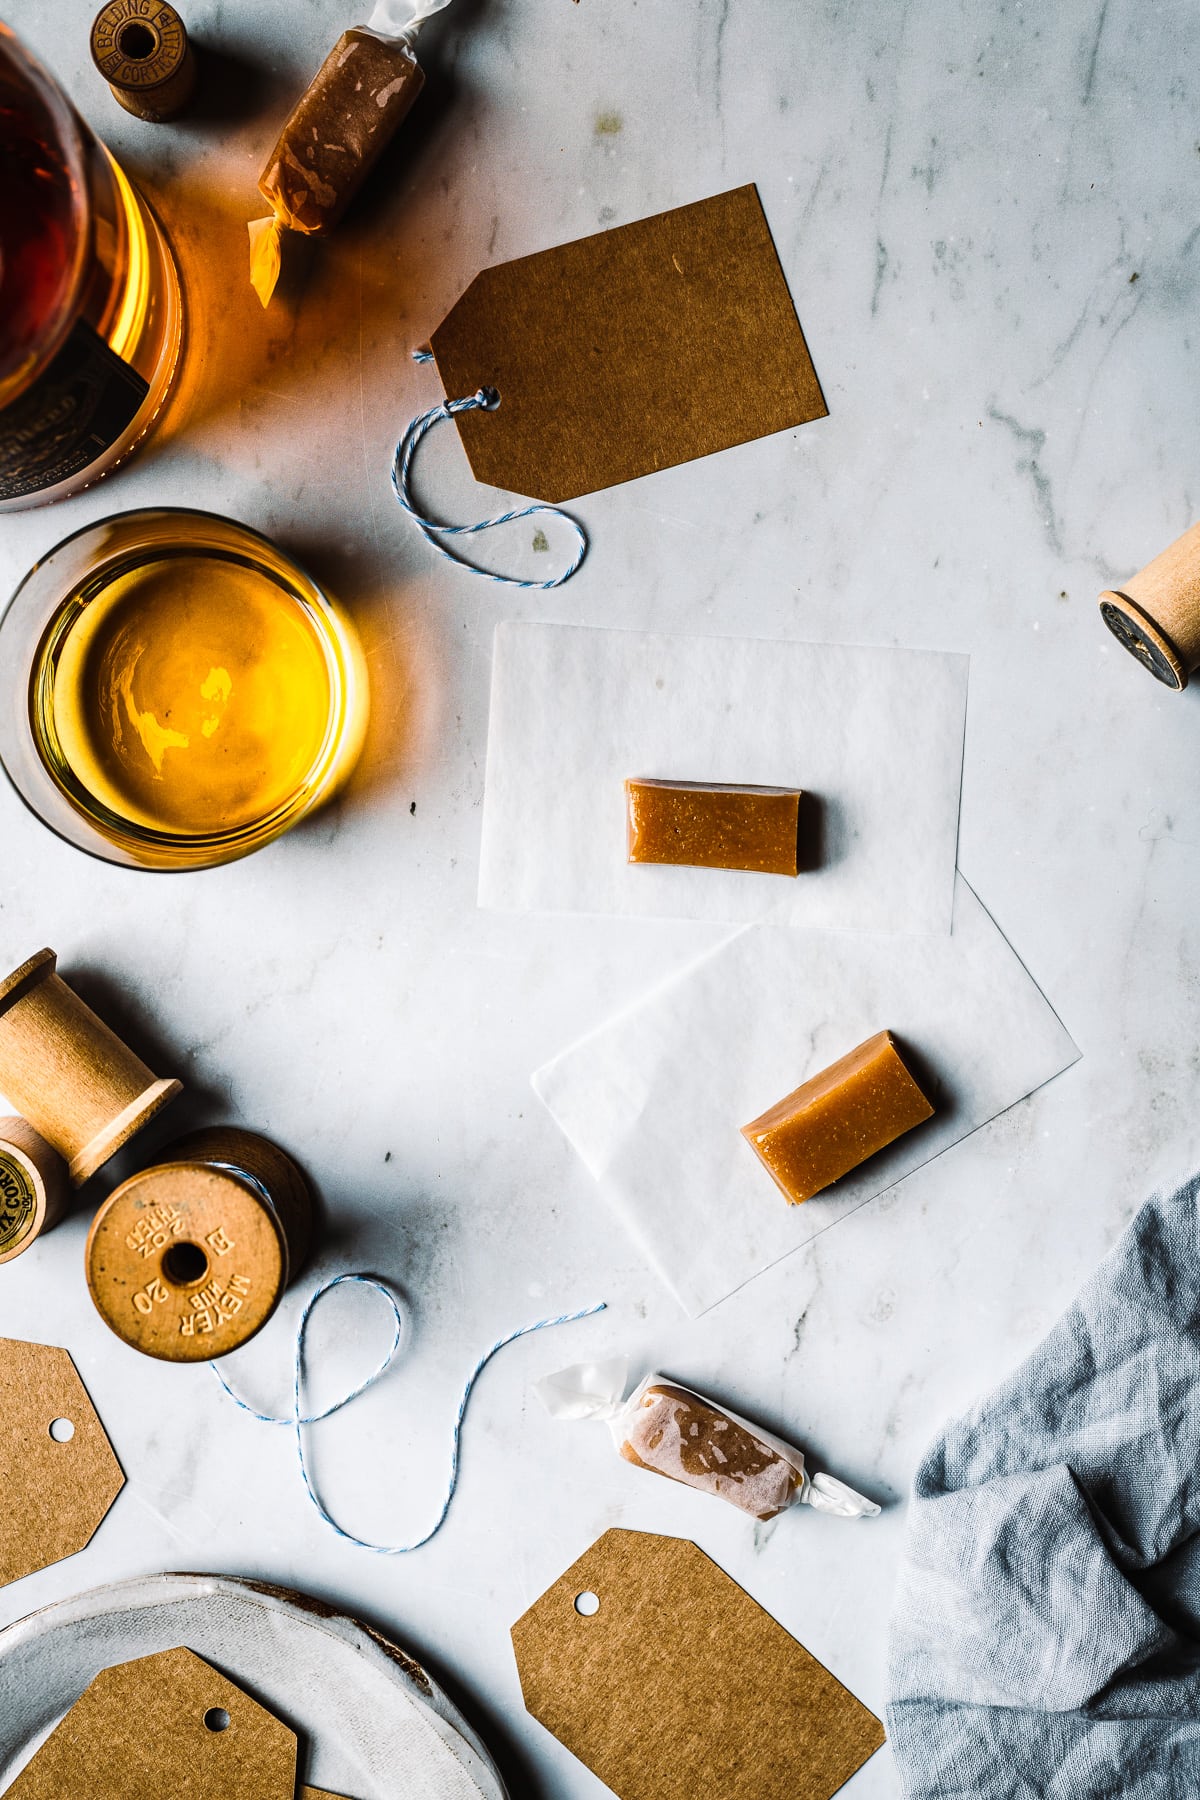 Whiskey salted caramels being wrapped on a grey marble surface. There is a vintage spool of twine, brown paper gift tags, and a blue linen napkin nearby.